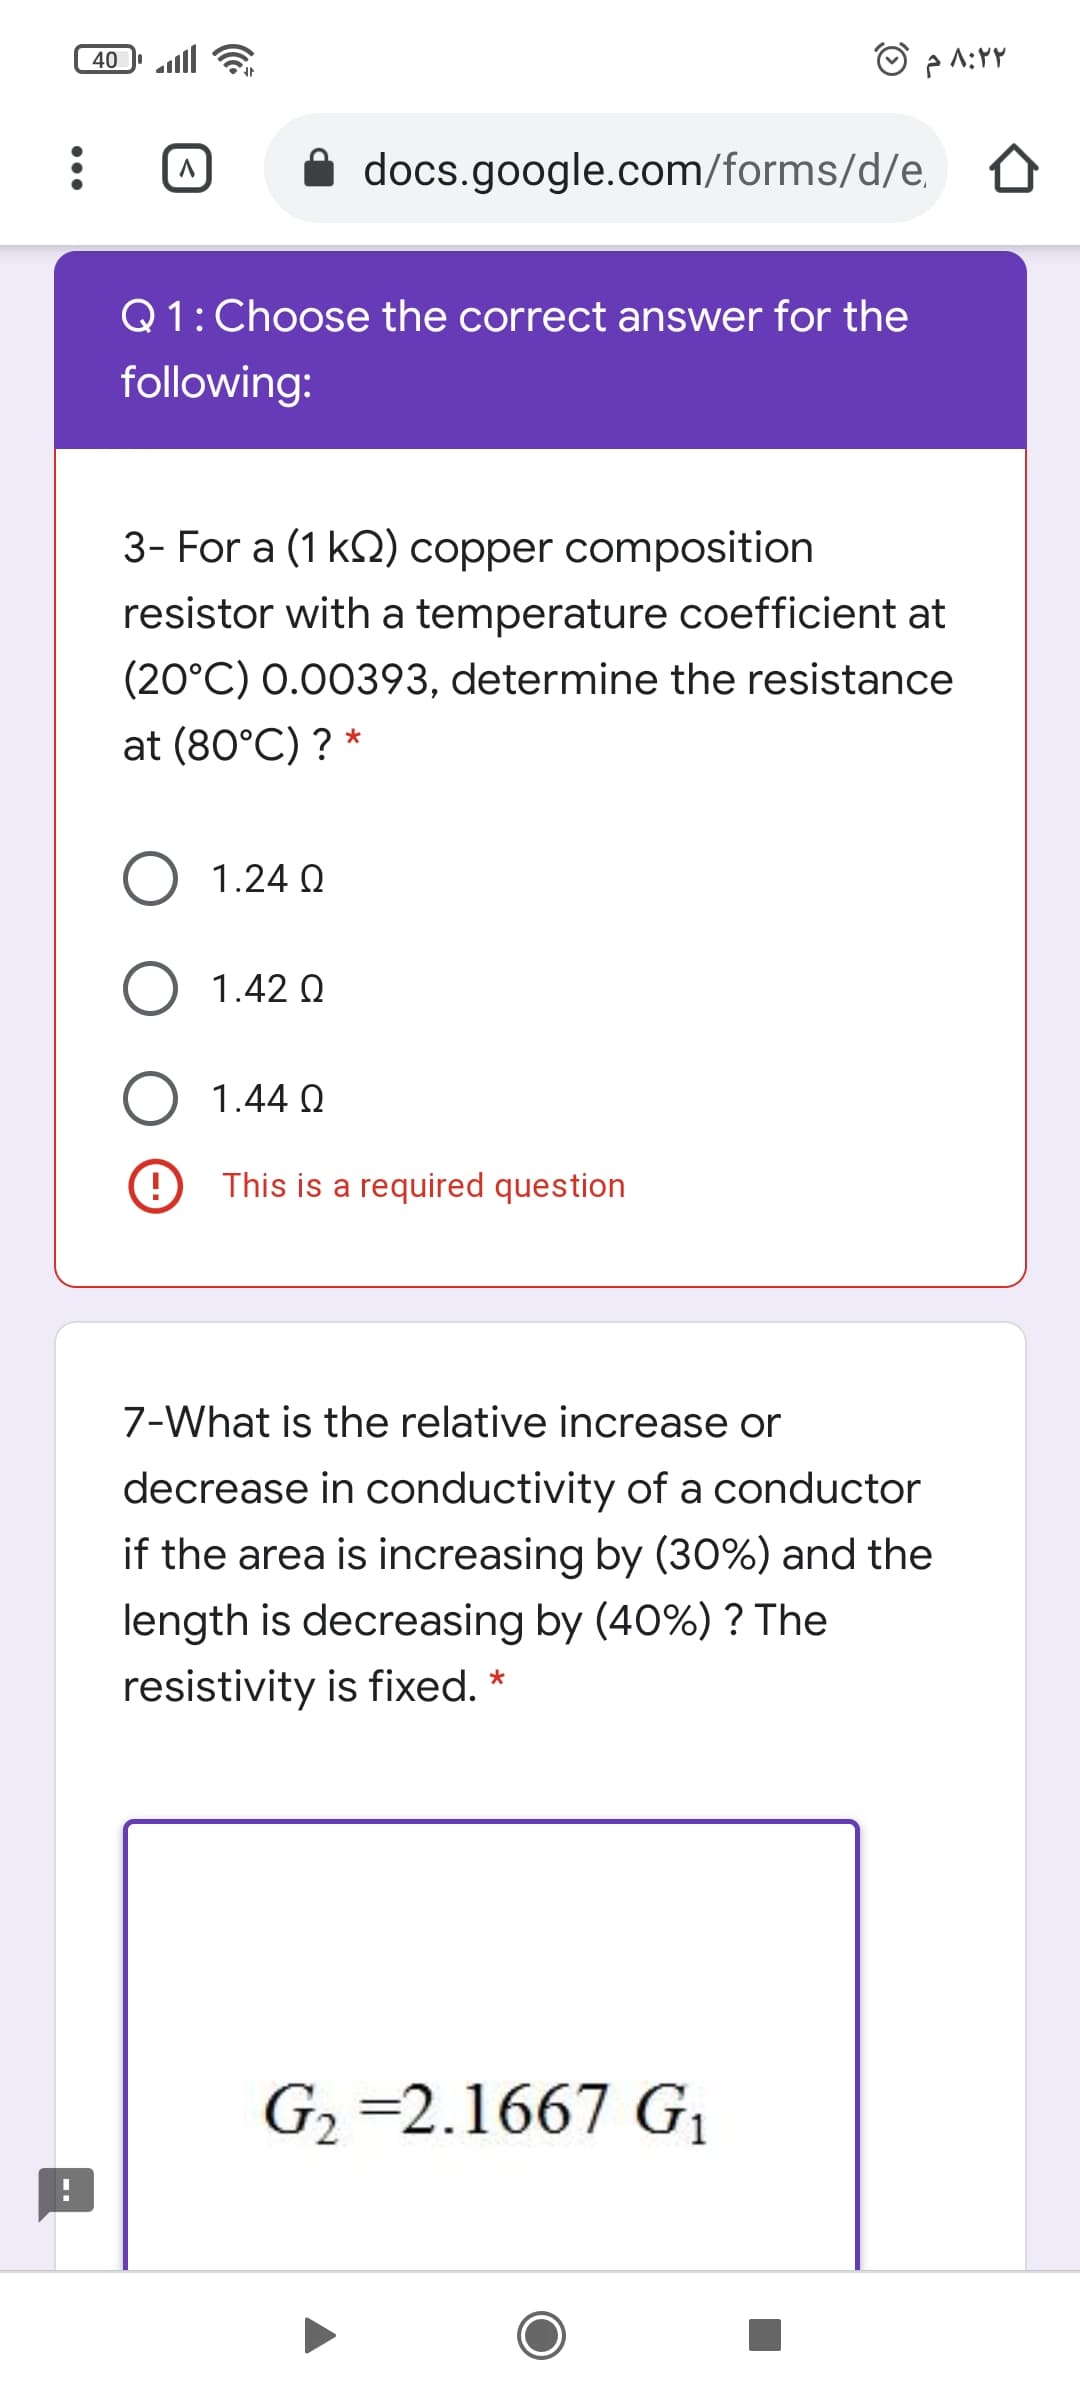 O pA:YY
40
docs.google.com/forms/d/e,
Q1: Choose the correct answer for the
following:
3- For a (1 k2) copper composition
resistor with a temperature coefficient at
(20°C) 0.00393, determine the resistance
at (80°C) ? *
1.24 Q
O 1.42 Q
1.44 Q
This is a required question
7-What is the relative increase or
decrease in conductivity of a conductor
if the area is increasing by (30%) and the
length is decreasing by (40%) ? The
resistivity is fixed. *
G2 =2.1667 G1
